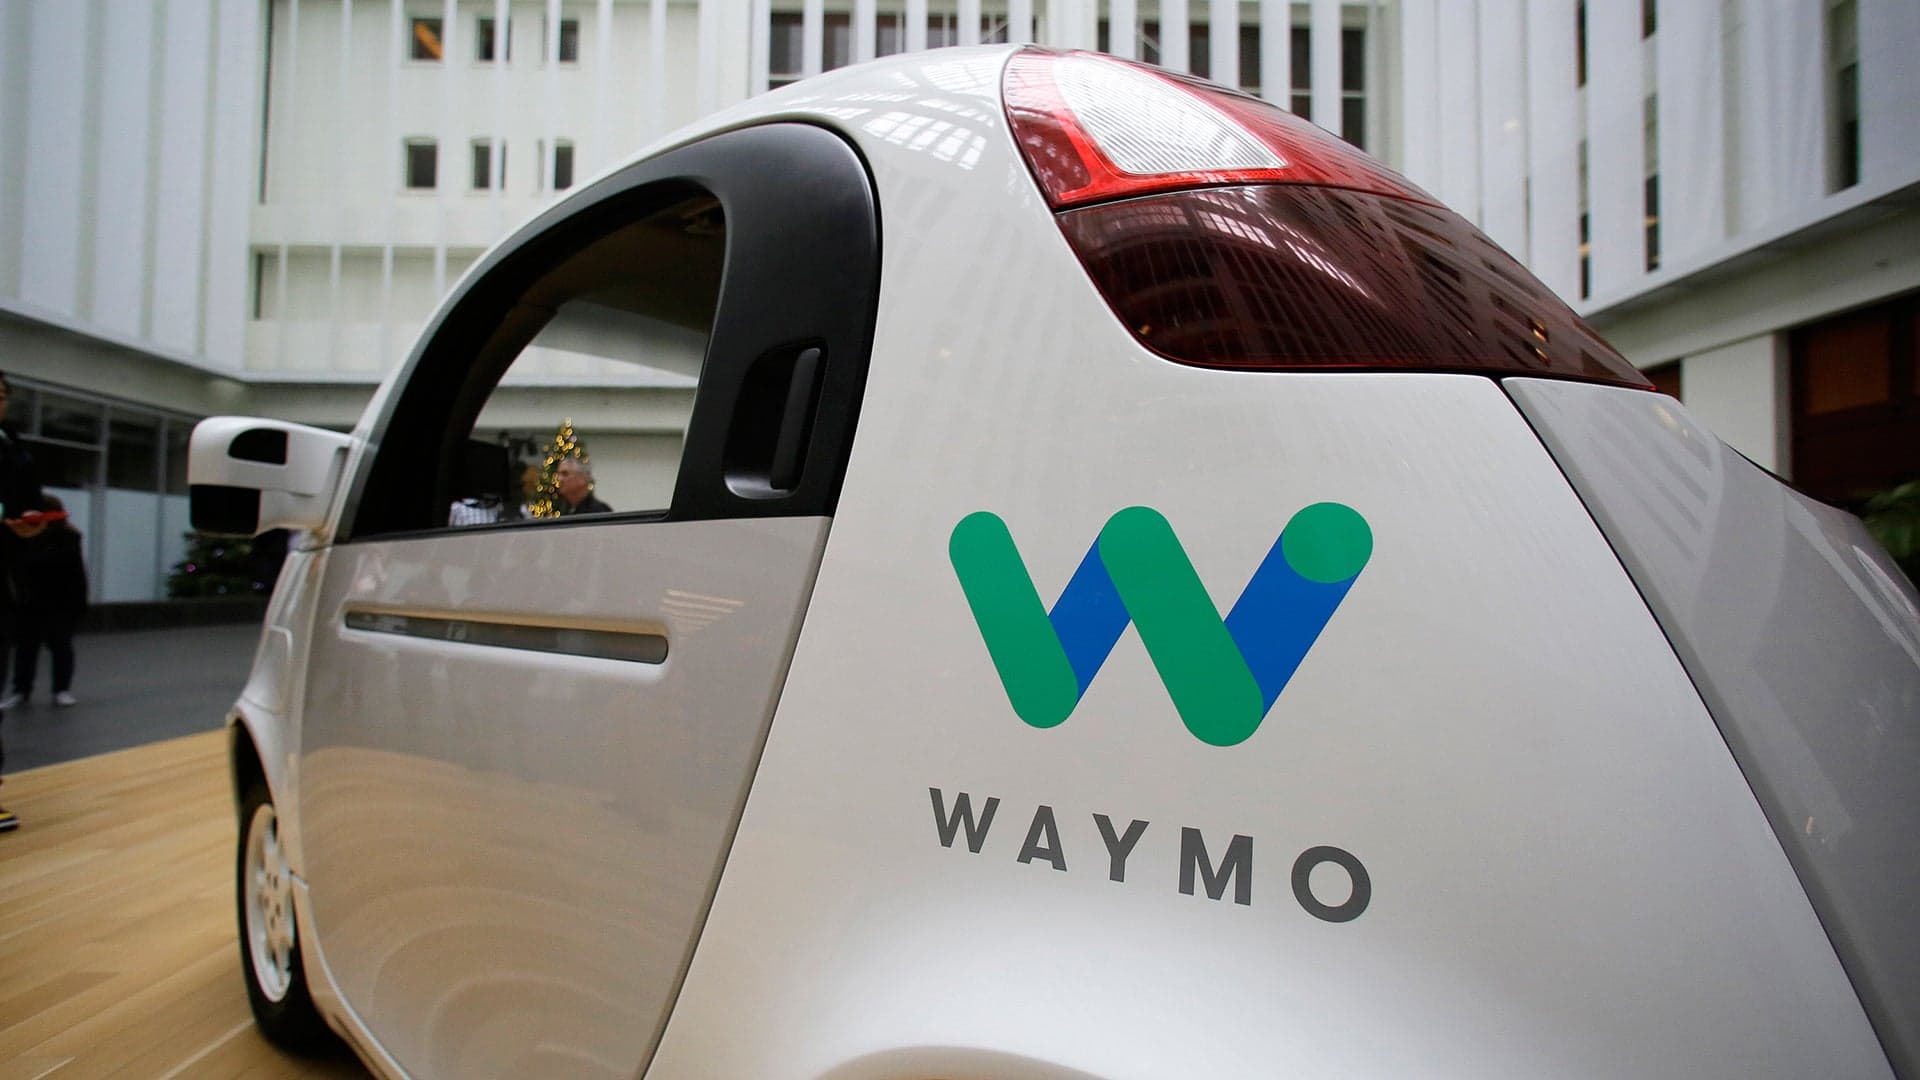 Self-Driving Trucks Might Hit the Streets Before Autonomous Taxis, Waymo CEO Says